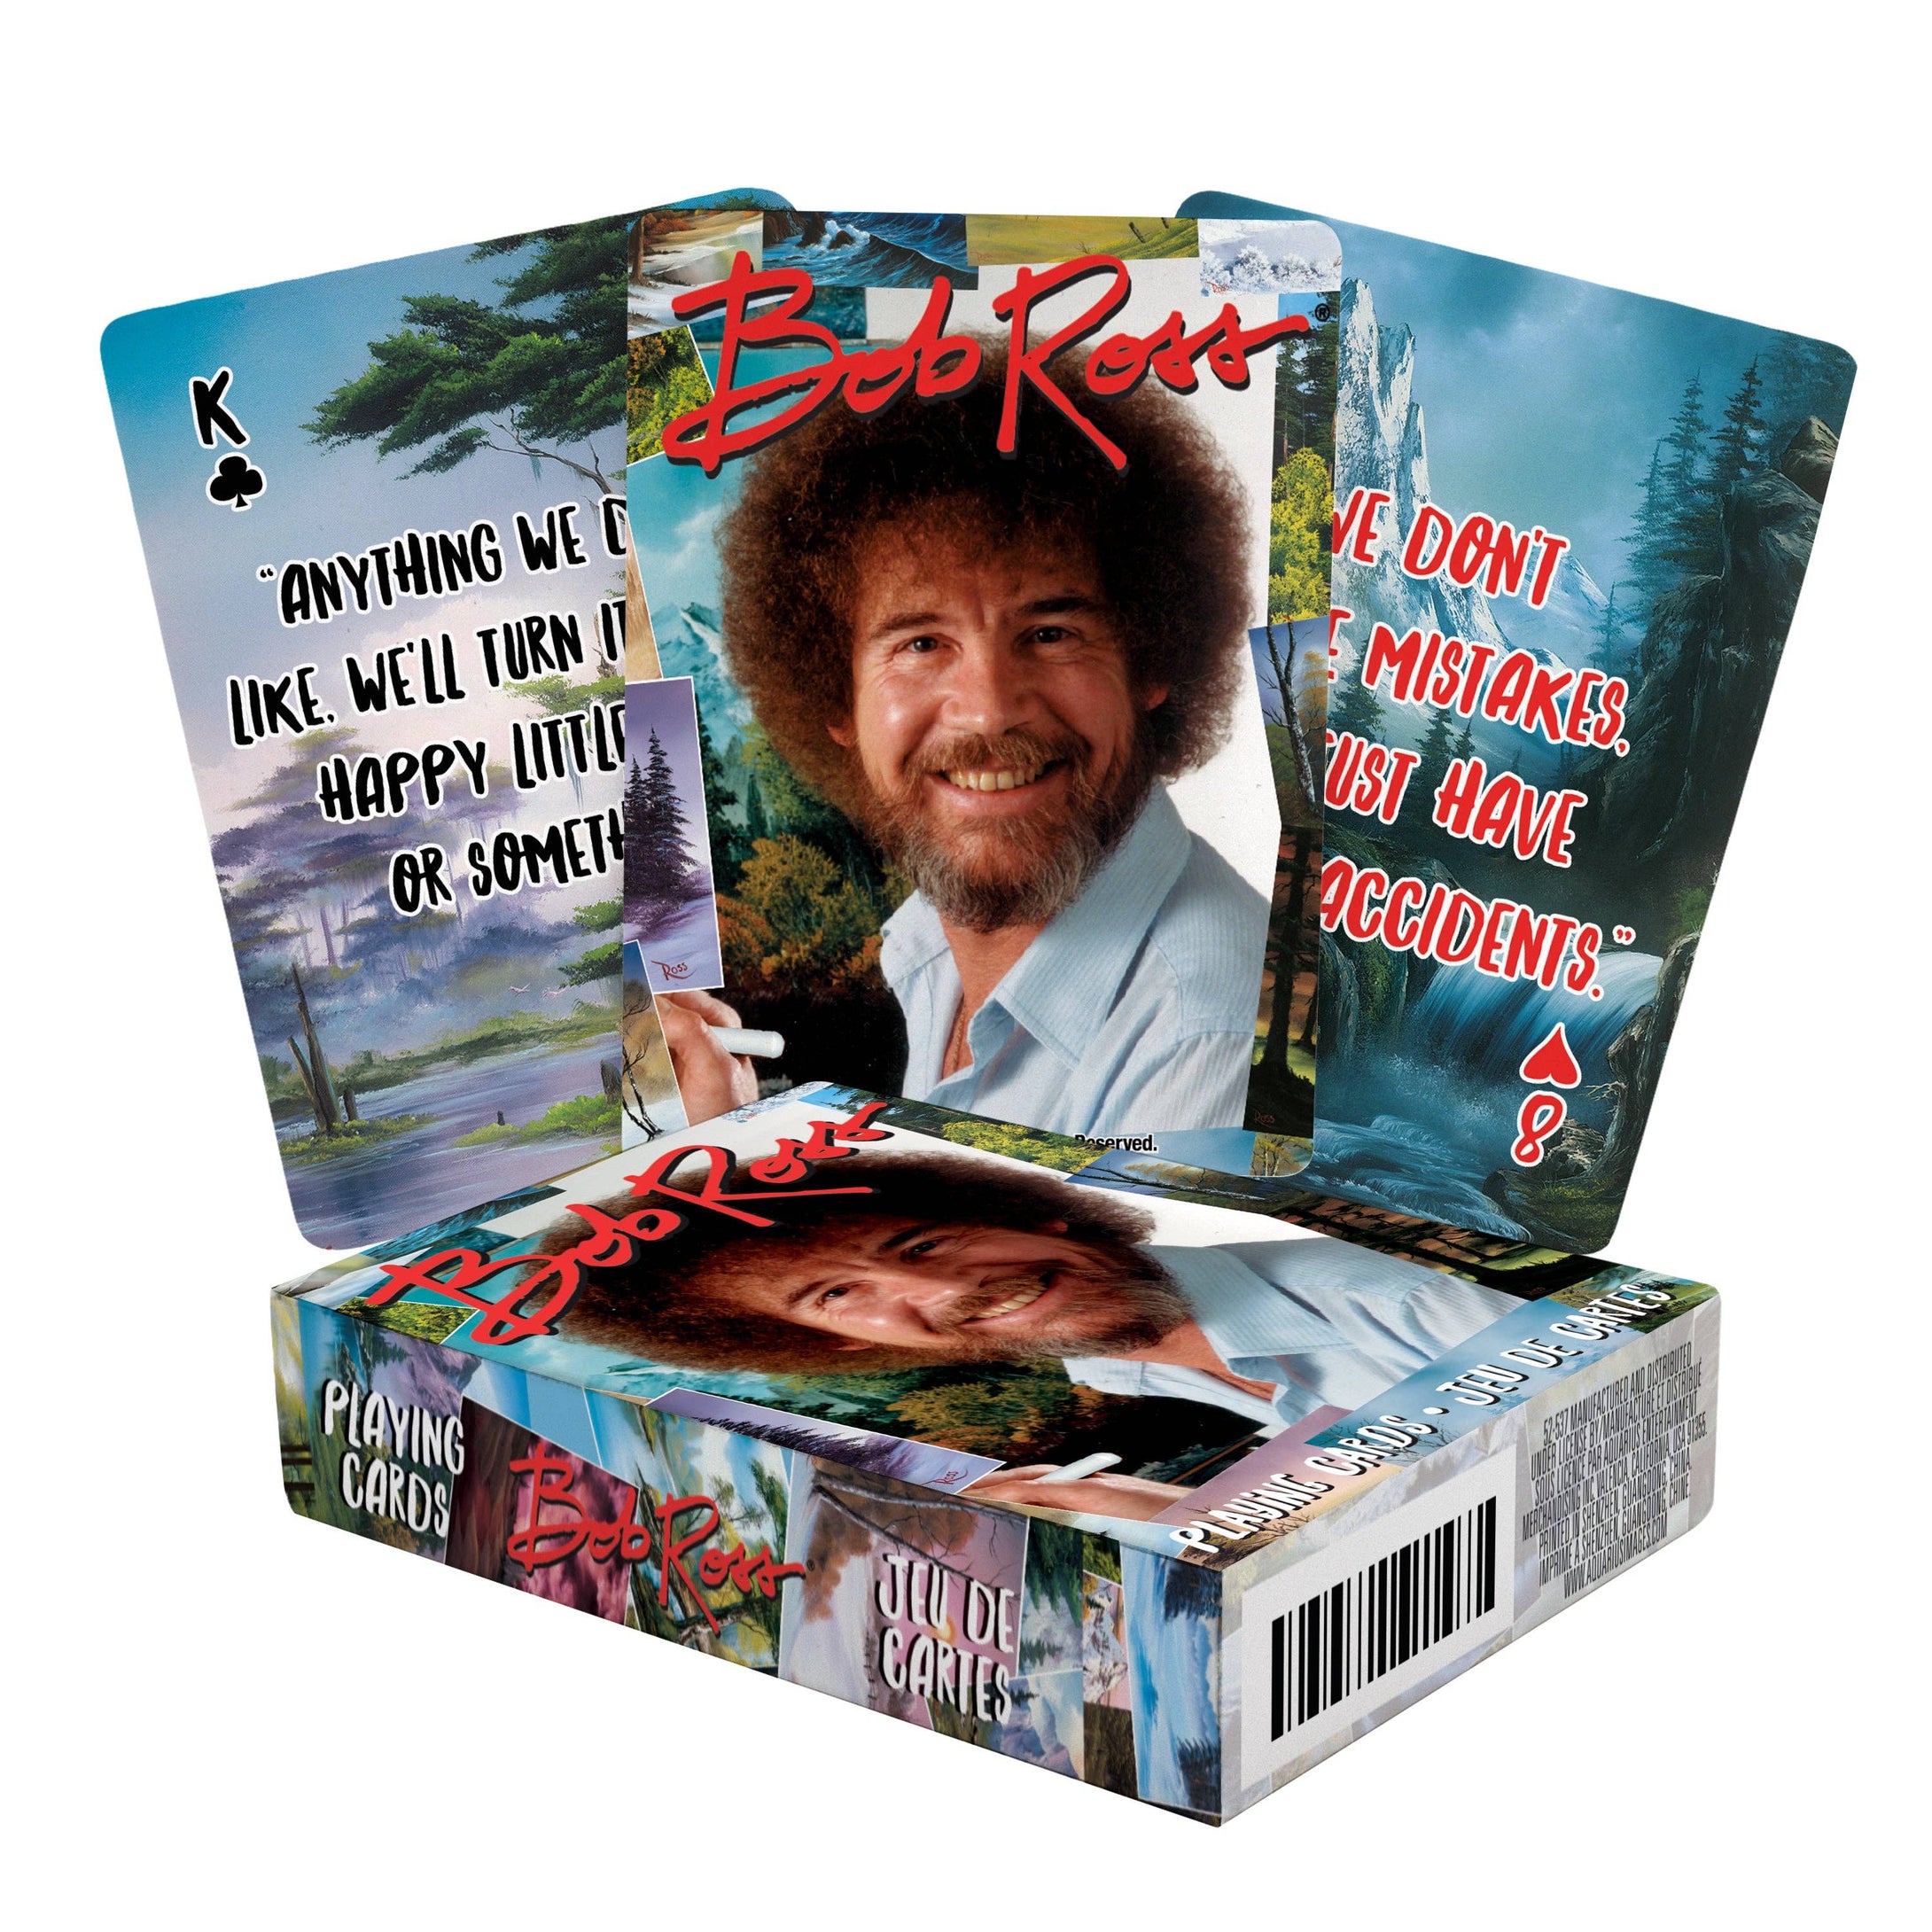 AQUARIUS, GAMAGO, ICUP, & ROCK SAWS by NMR Brands - Bob Ross Quotes Playing Cards